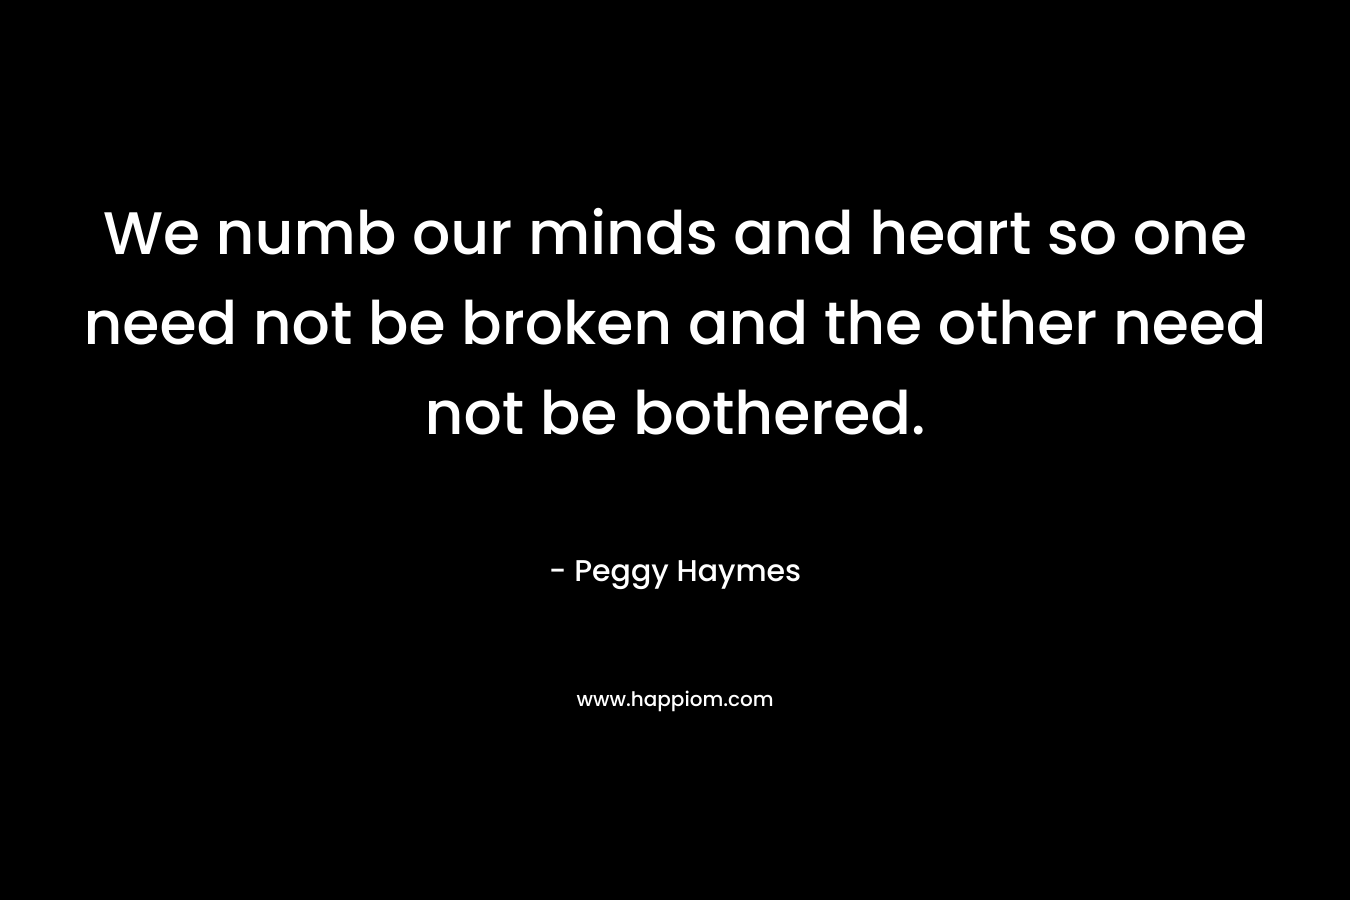 We numb our minds and heart so one need not be broken and the other need not be bothered. – Peggy Haymes